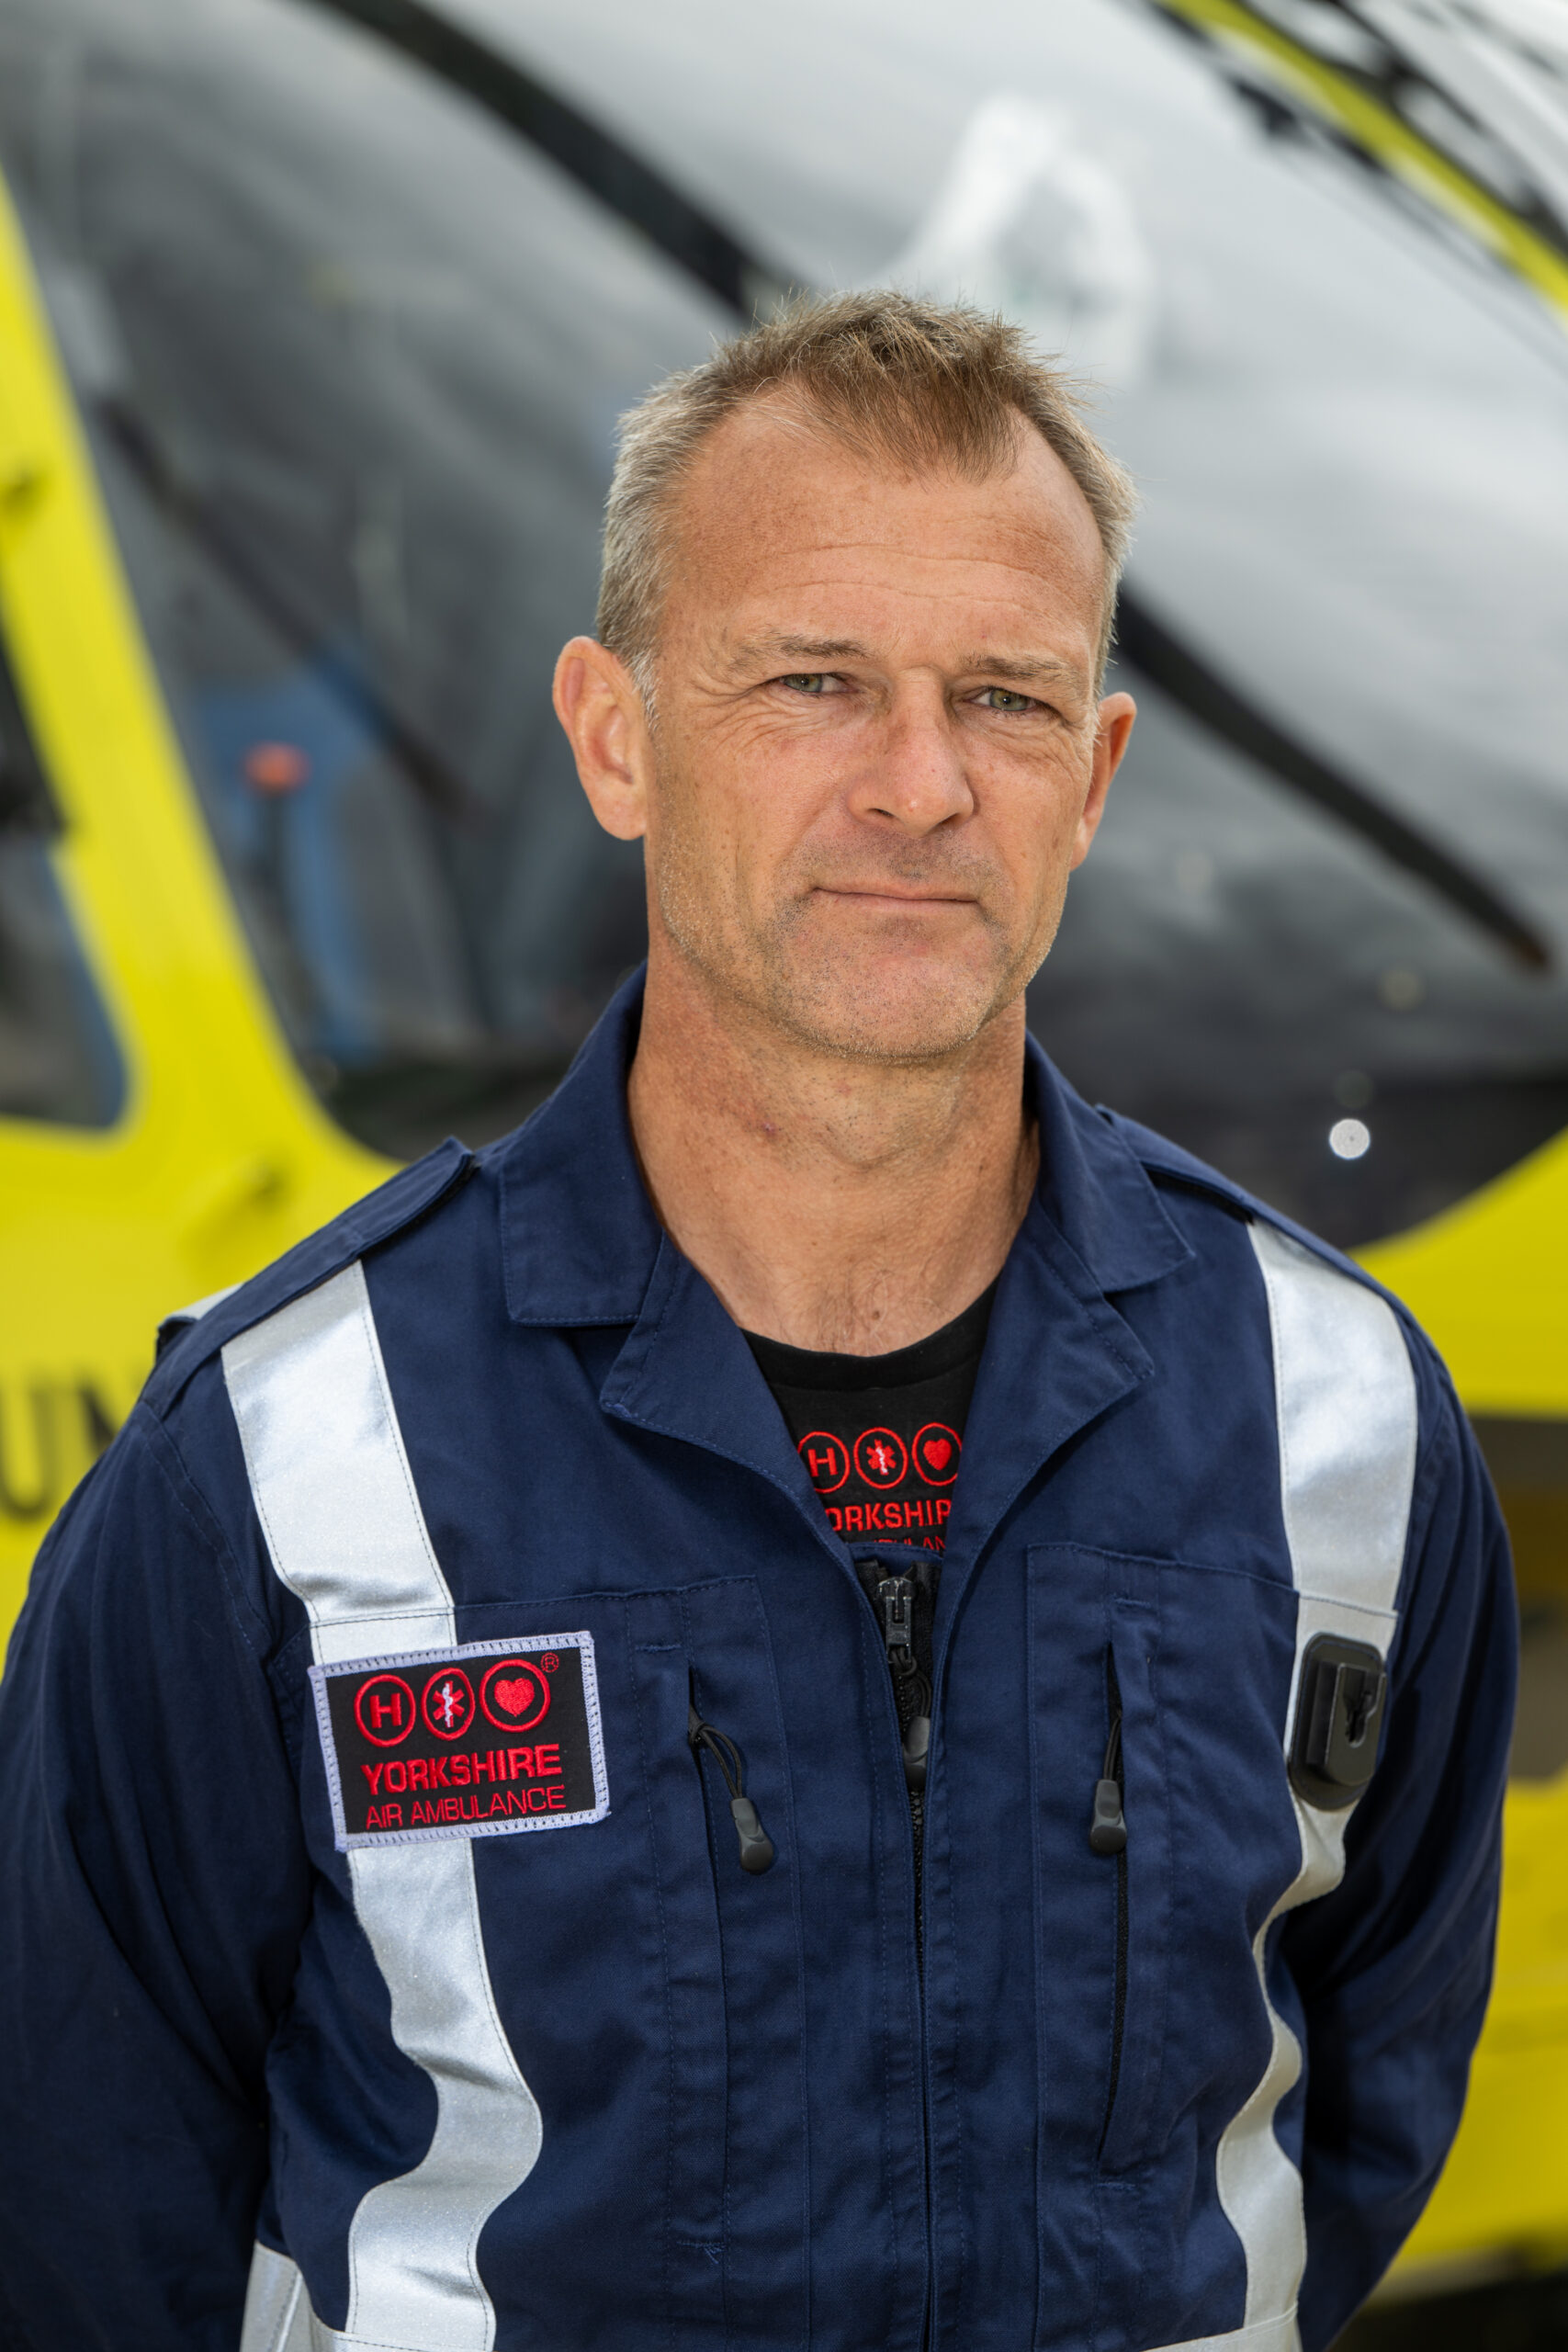 A man with short hair, wearing a blue flying suit, is standing in front of a yellow helicopter